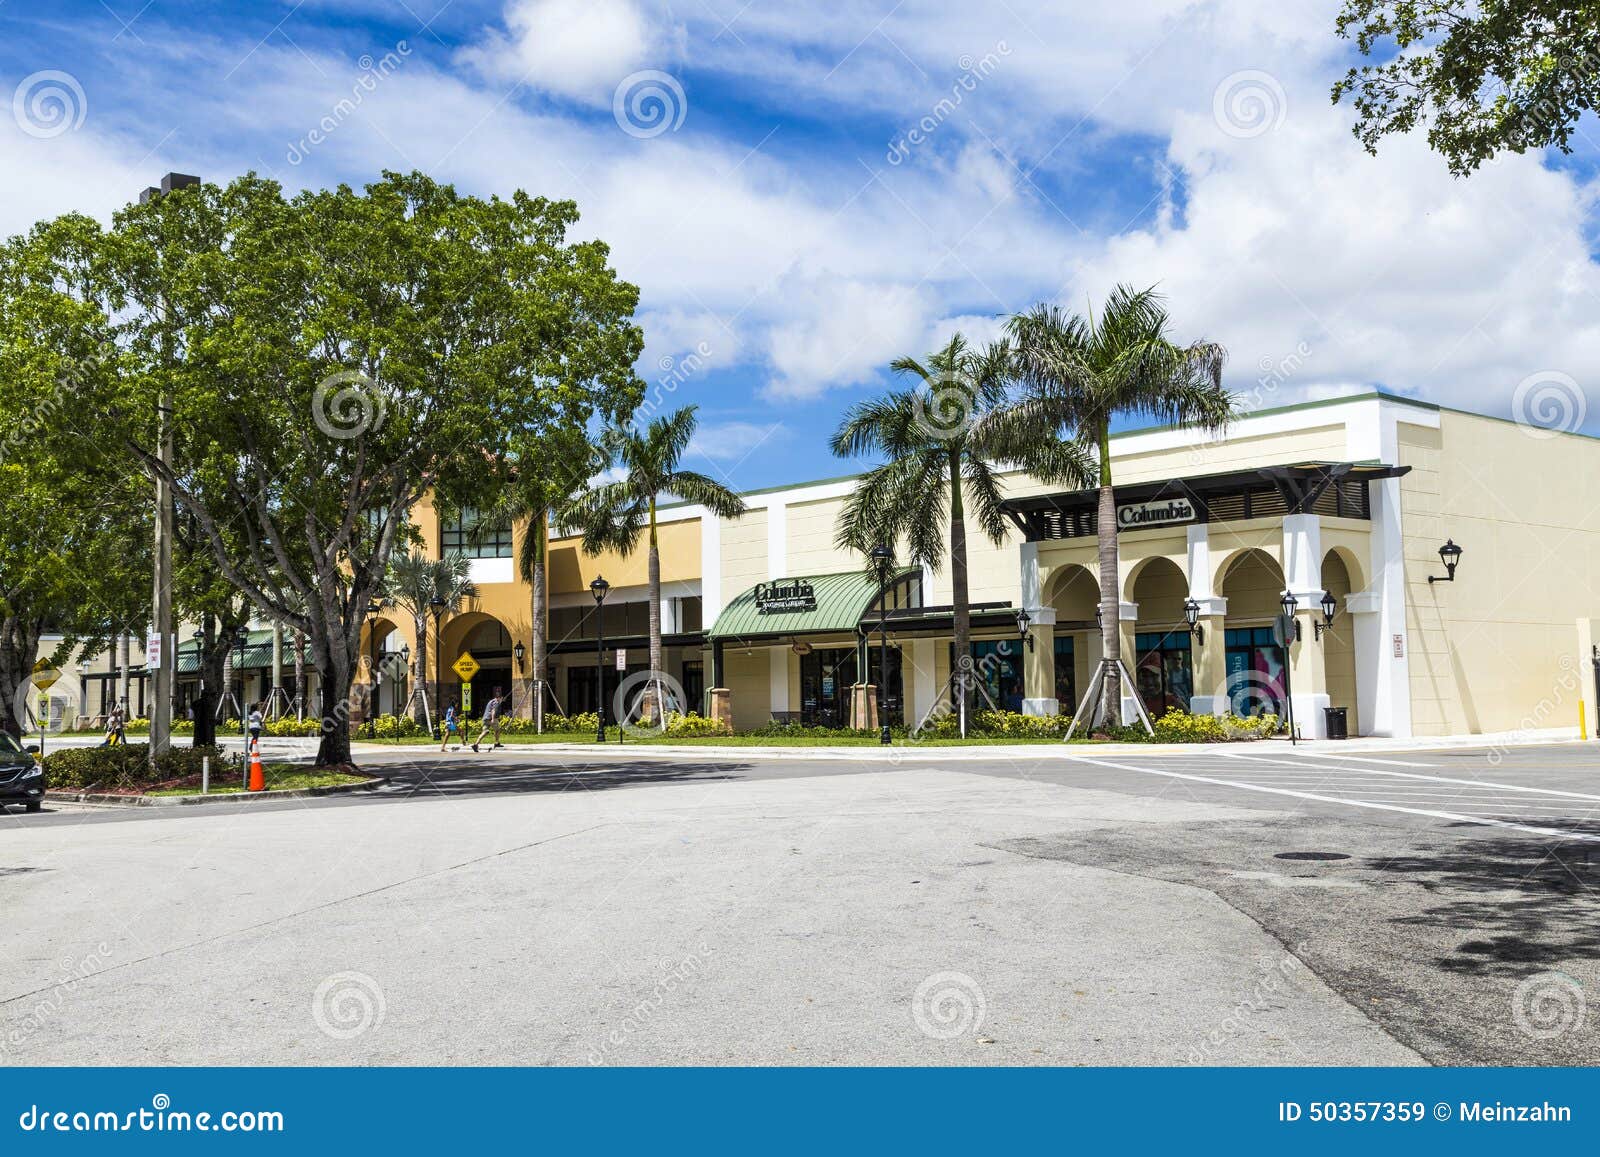 Sawgrass Mills Mall editorial stock image. Image of famous - 50357359